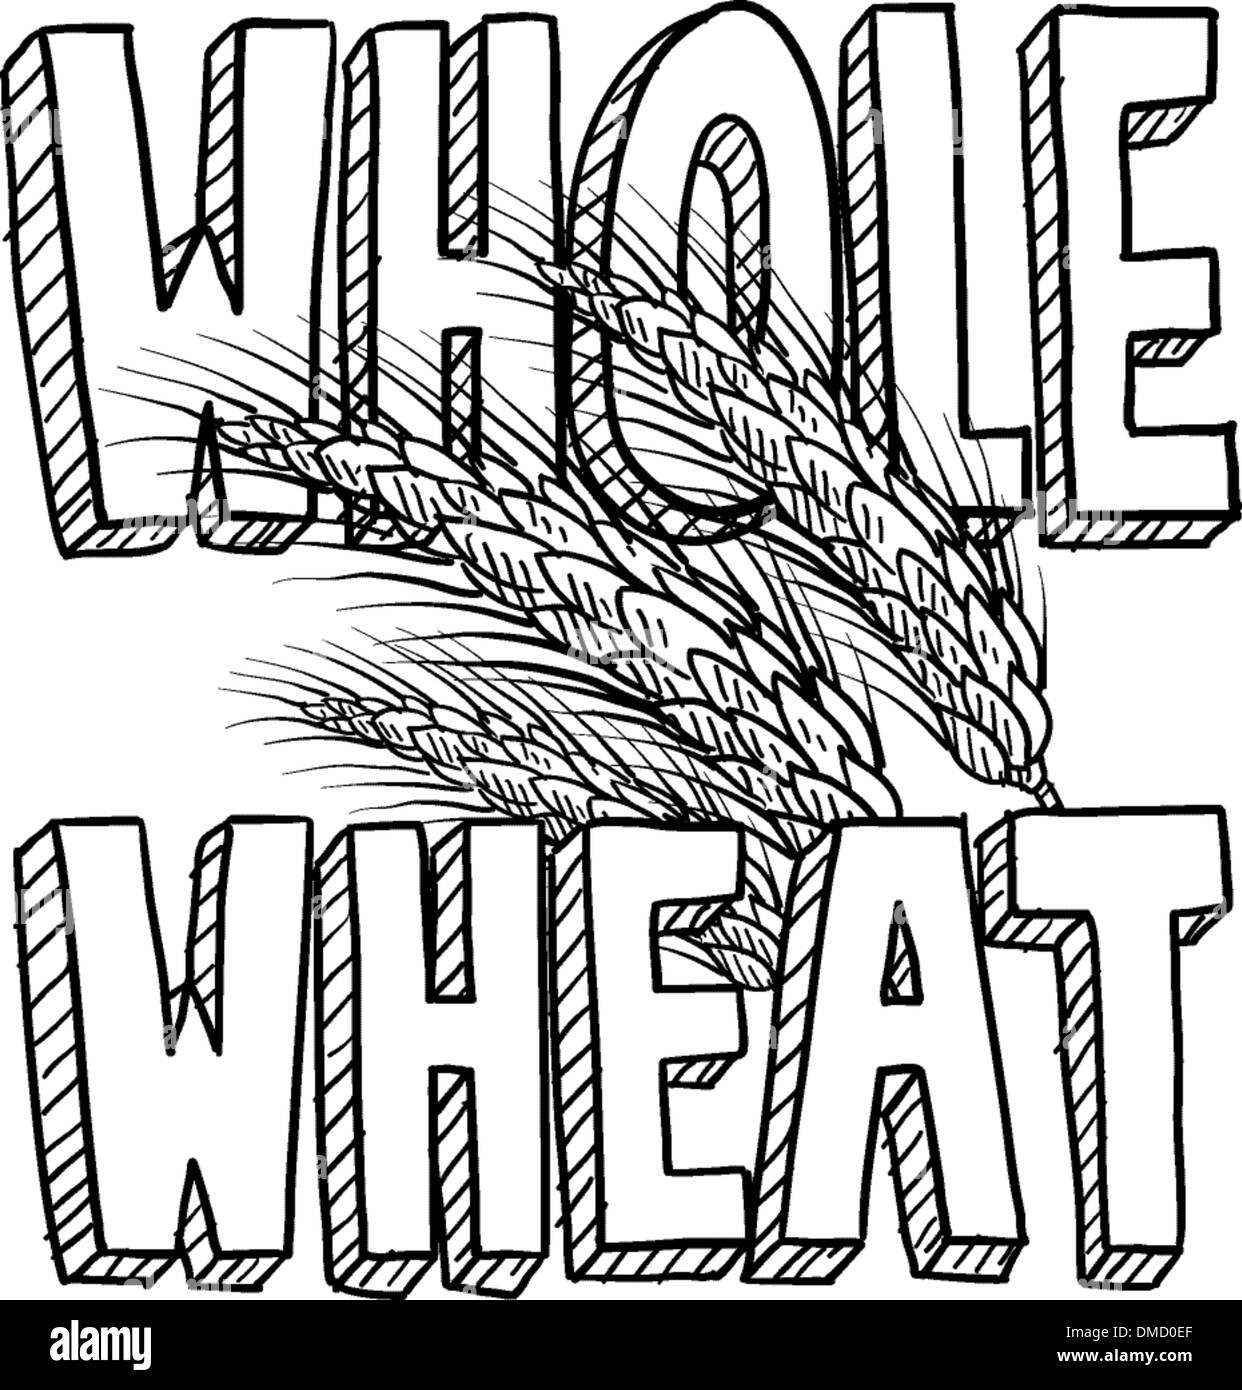 Whole wheat food sketch Stock Vector